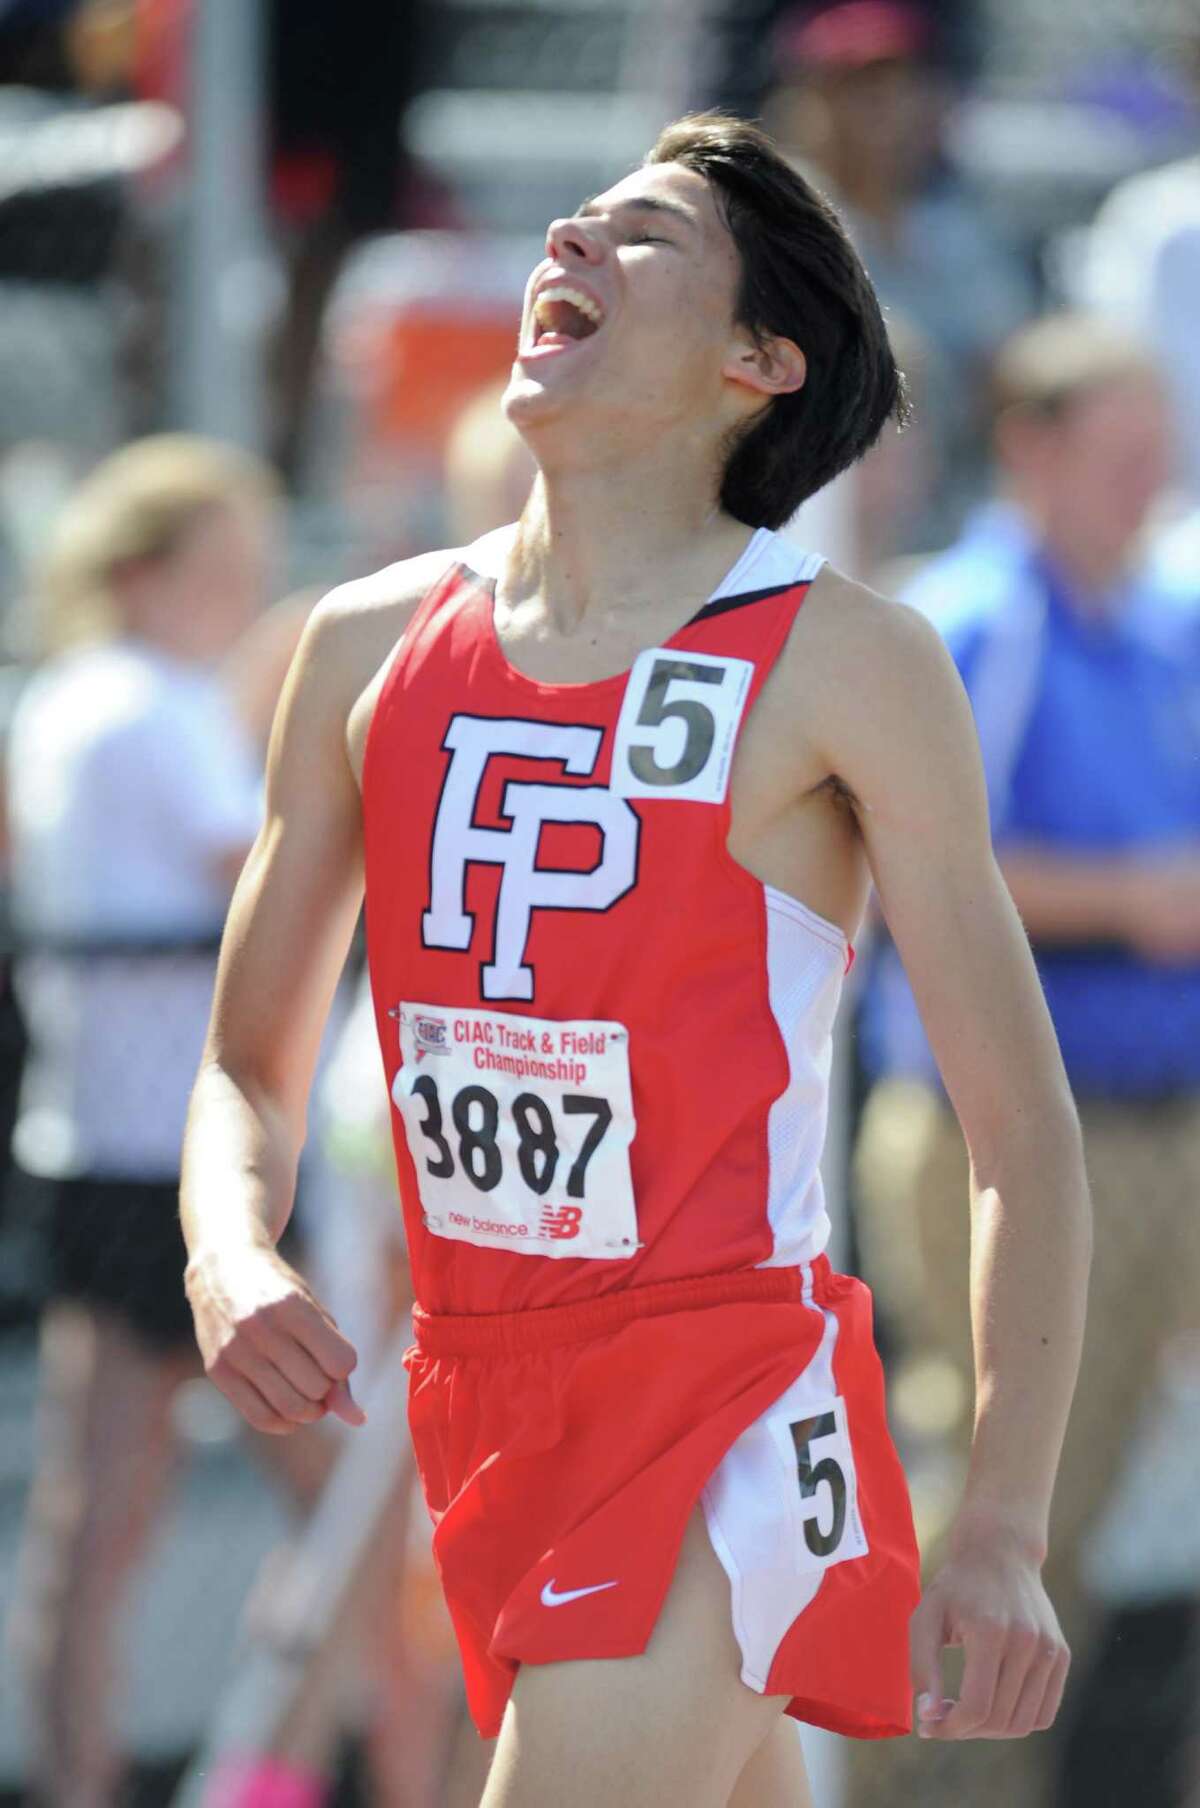 Fairfield Prep's Christian Alvarado celebrates after winning the boys 3200 meter run at the CIAC Class LL Connecticut Outdoor Track & Field State Championship at Danbury High School in Danbury, Conn. Thursday, June 5, 2014. Alvarado won the event with a time of 9:06.67. Staples won the girls overall championship and Ridgefield won the boys overall championship.